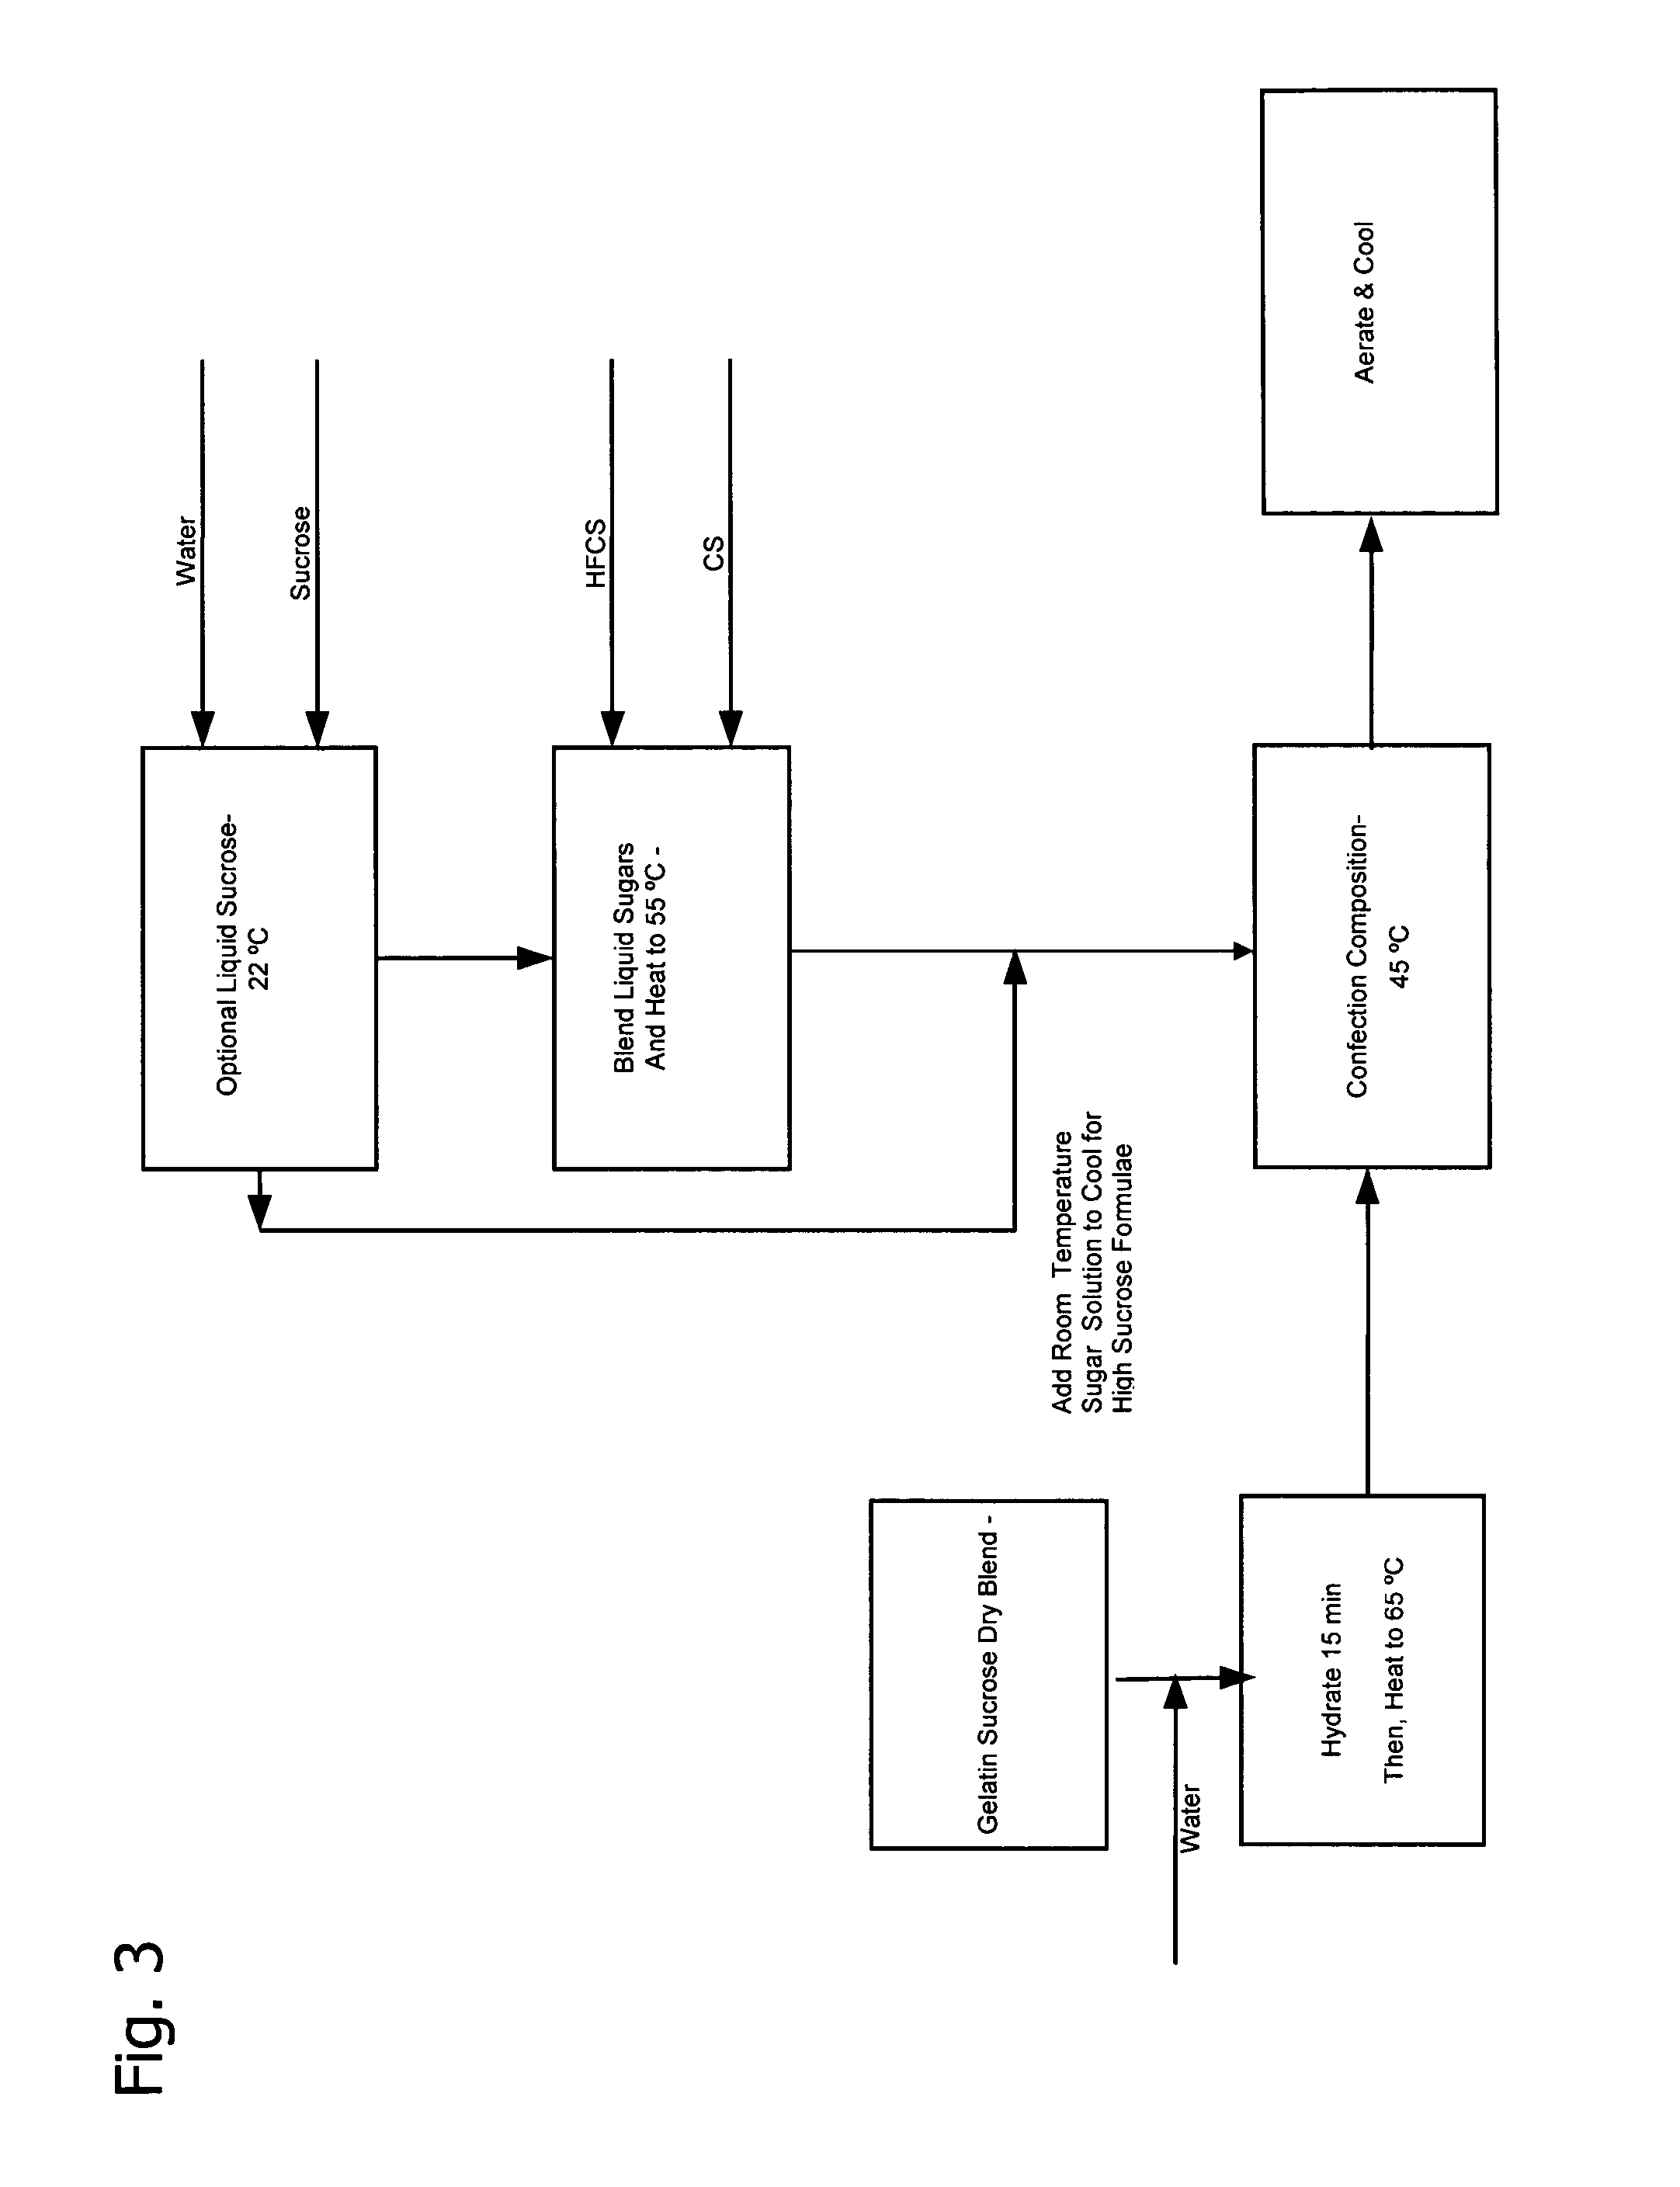 Process for manufacture of aerated confections with dry blend of sugar and gelatin